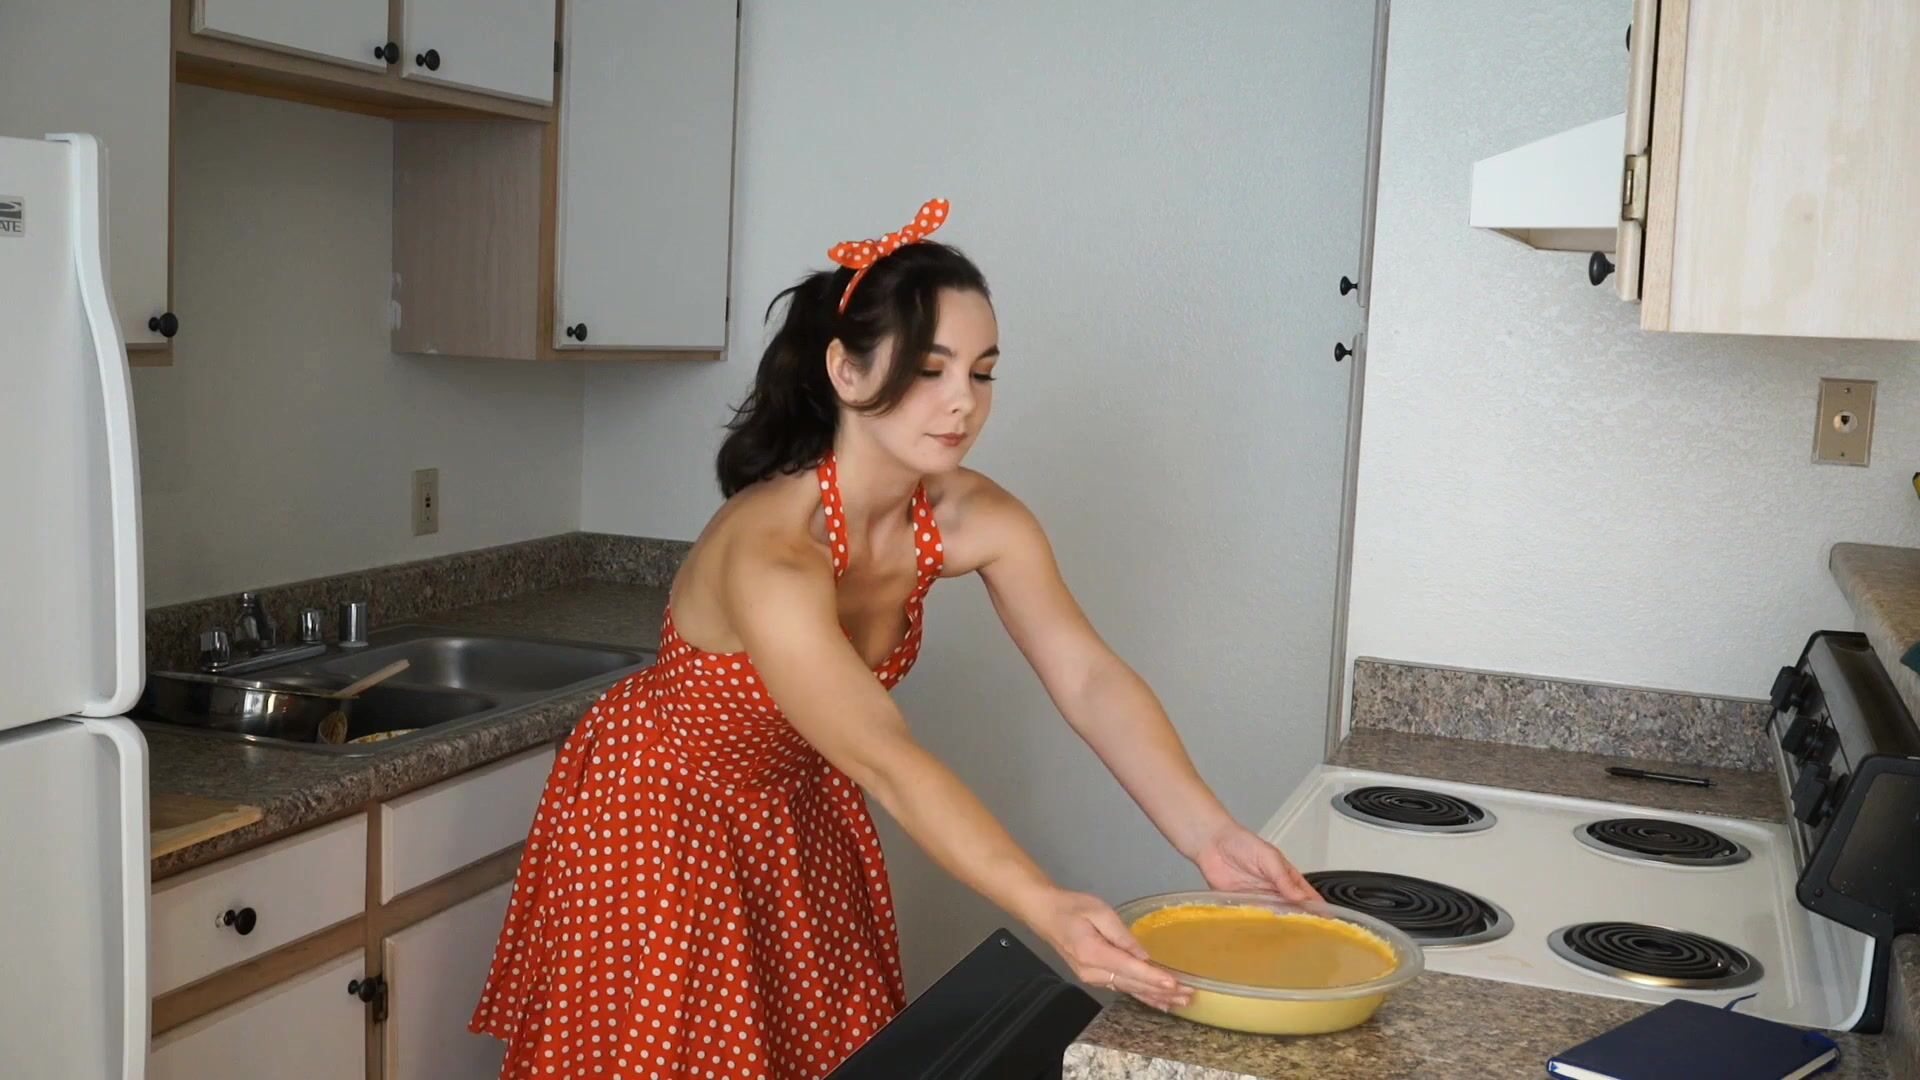 1950s Housewife Porn - Lexxykitty - 1950s Housewife Roleplay